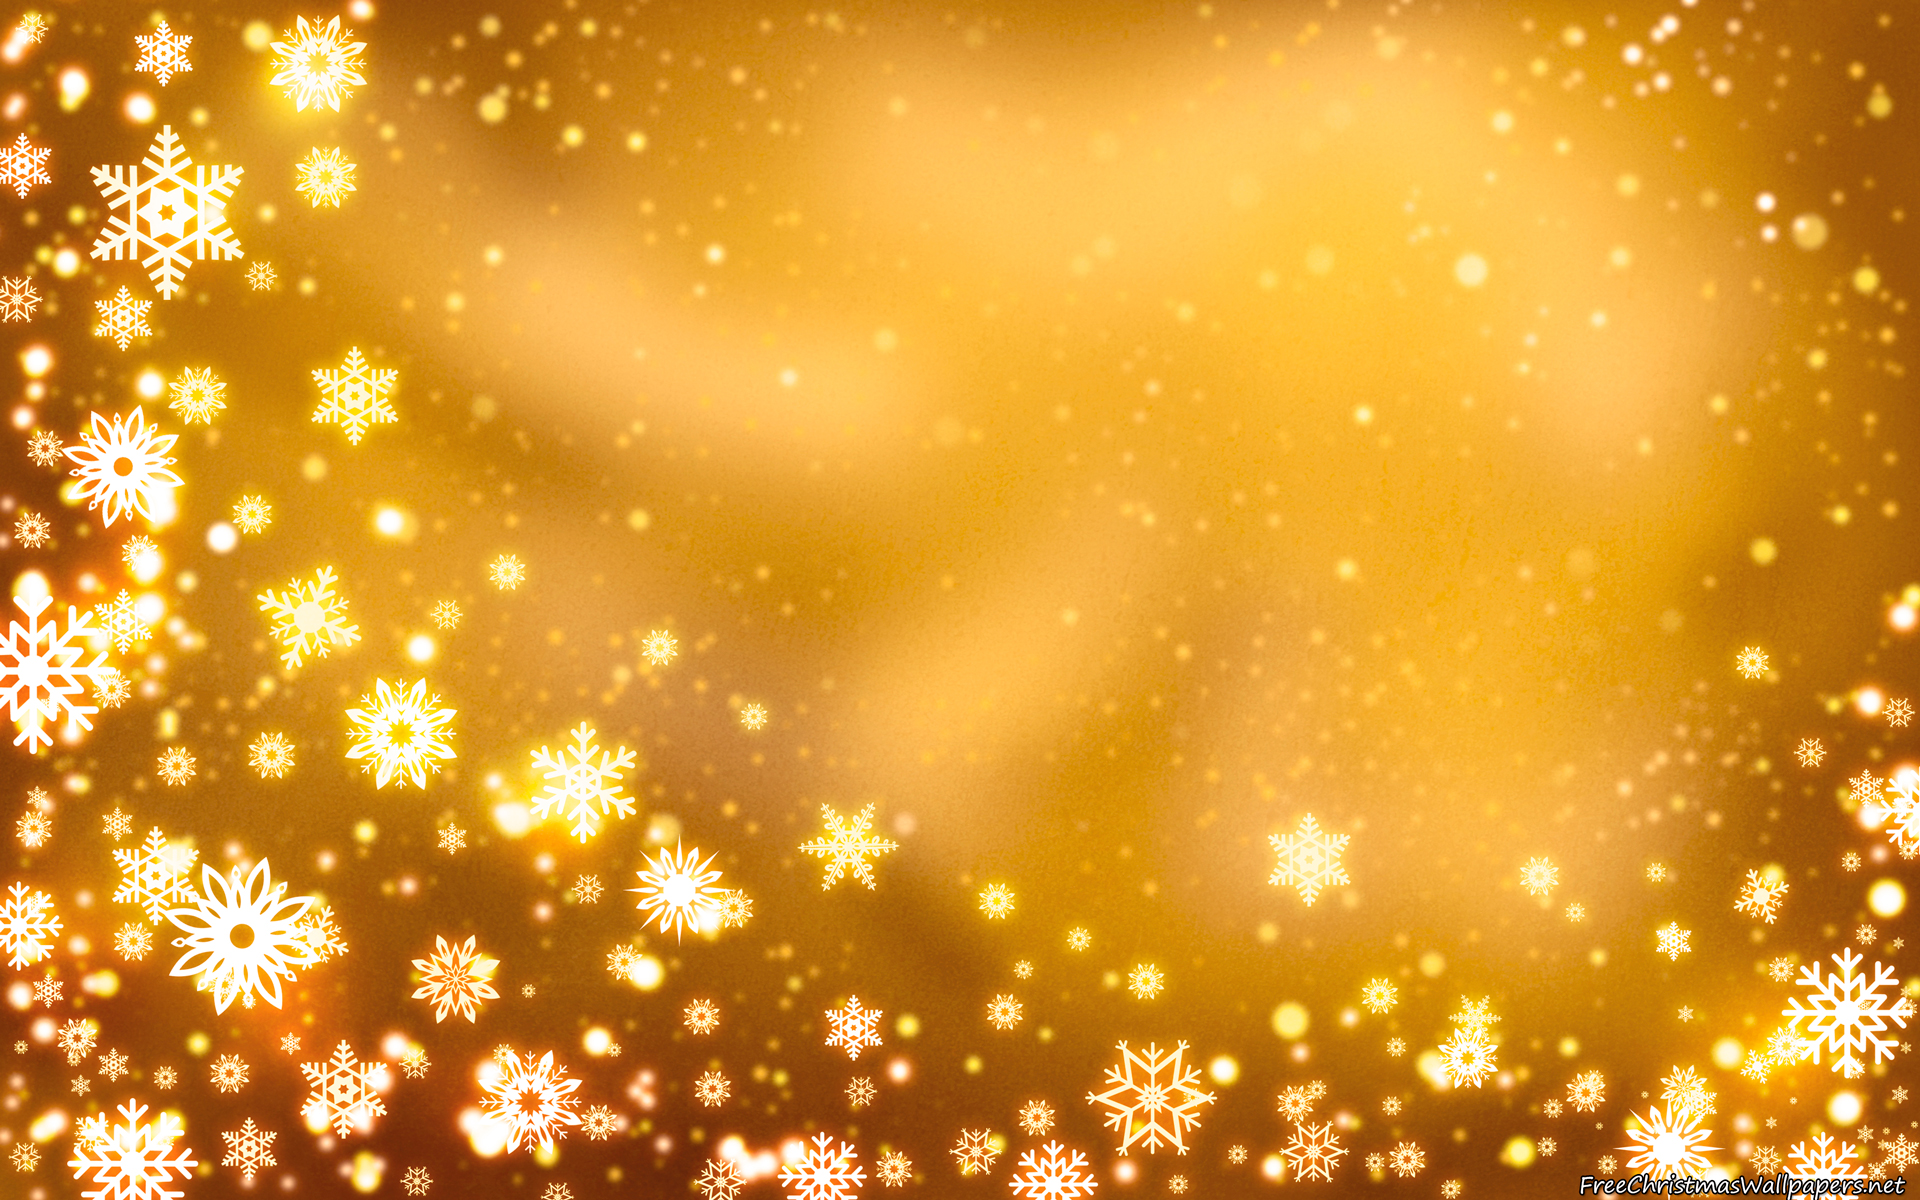 free-download-christmas-background-free-large-images-1920x1200-for-your-desktop-mobile